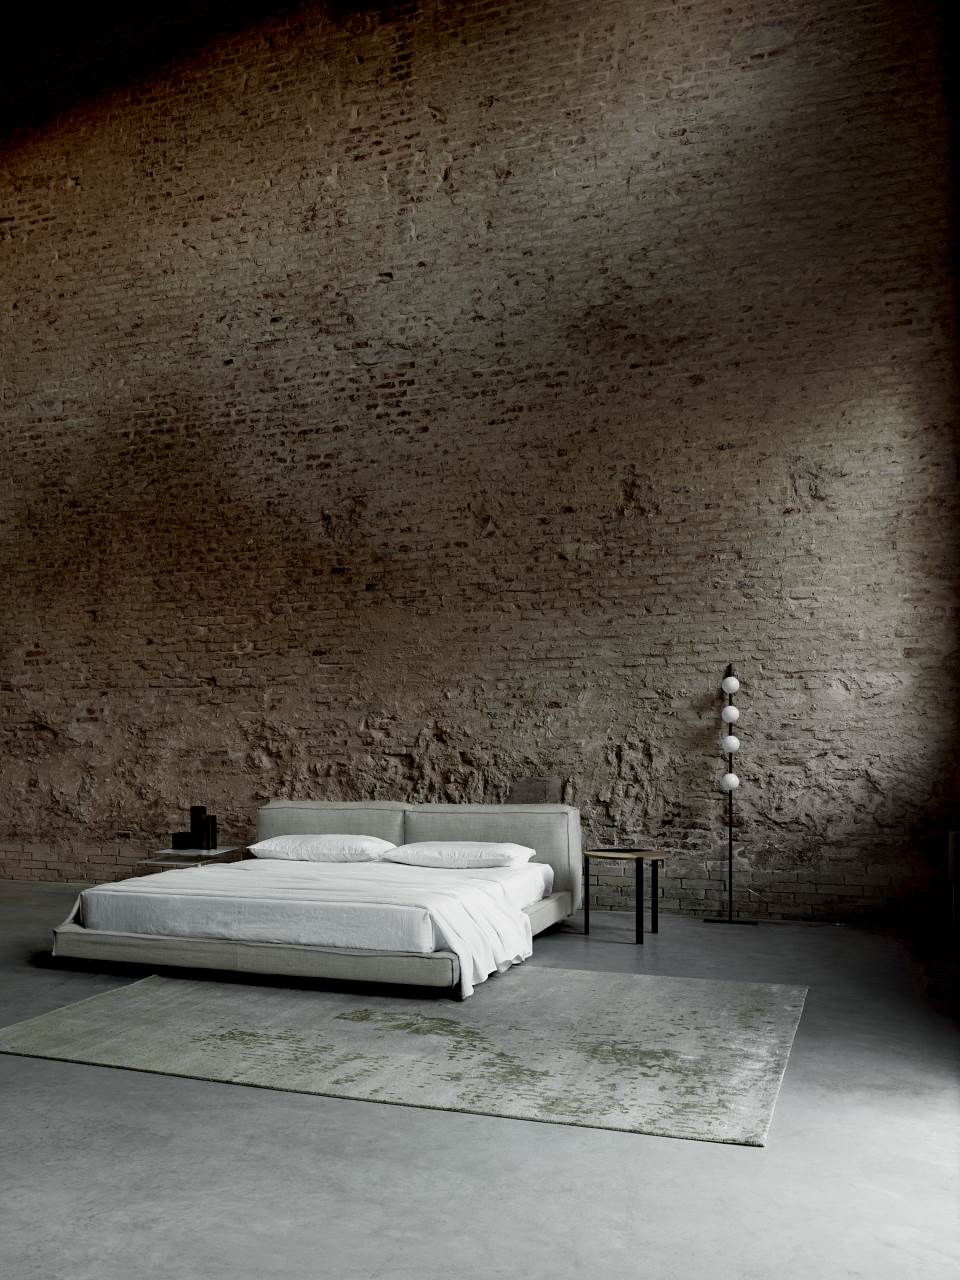 NeoWall Bed